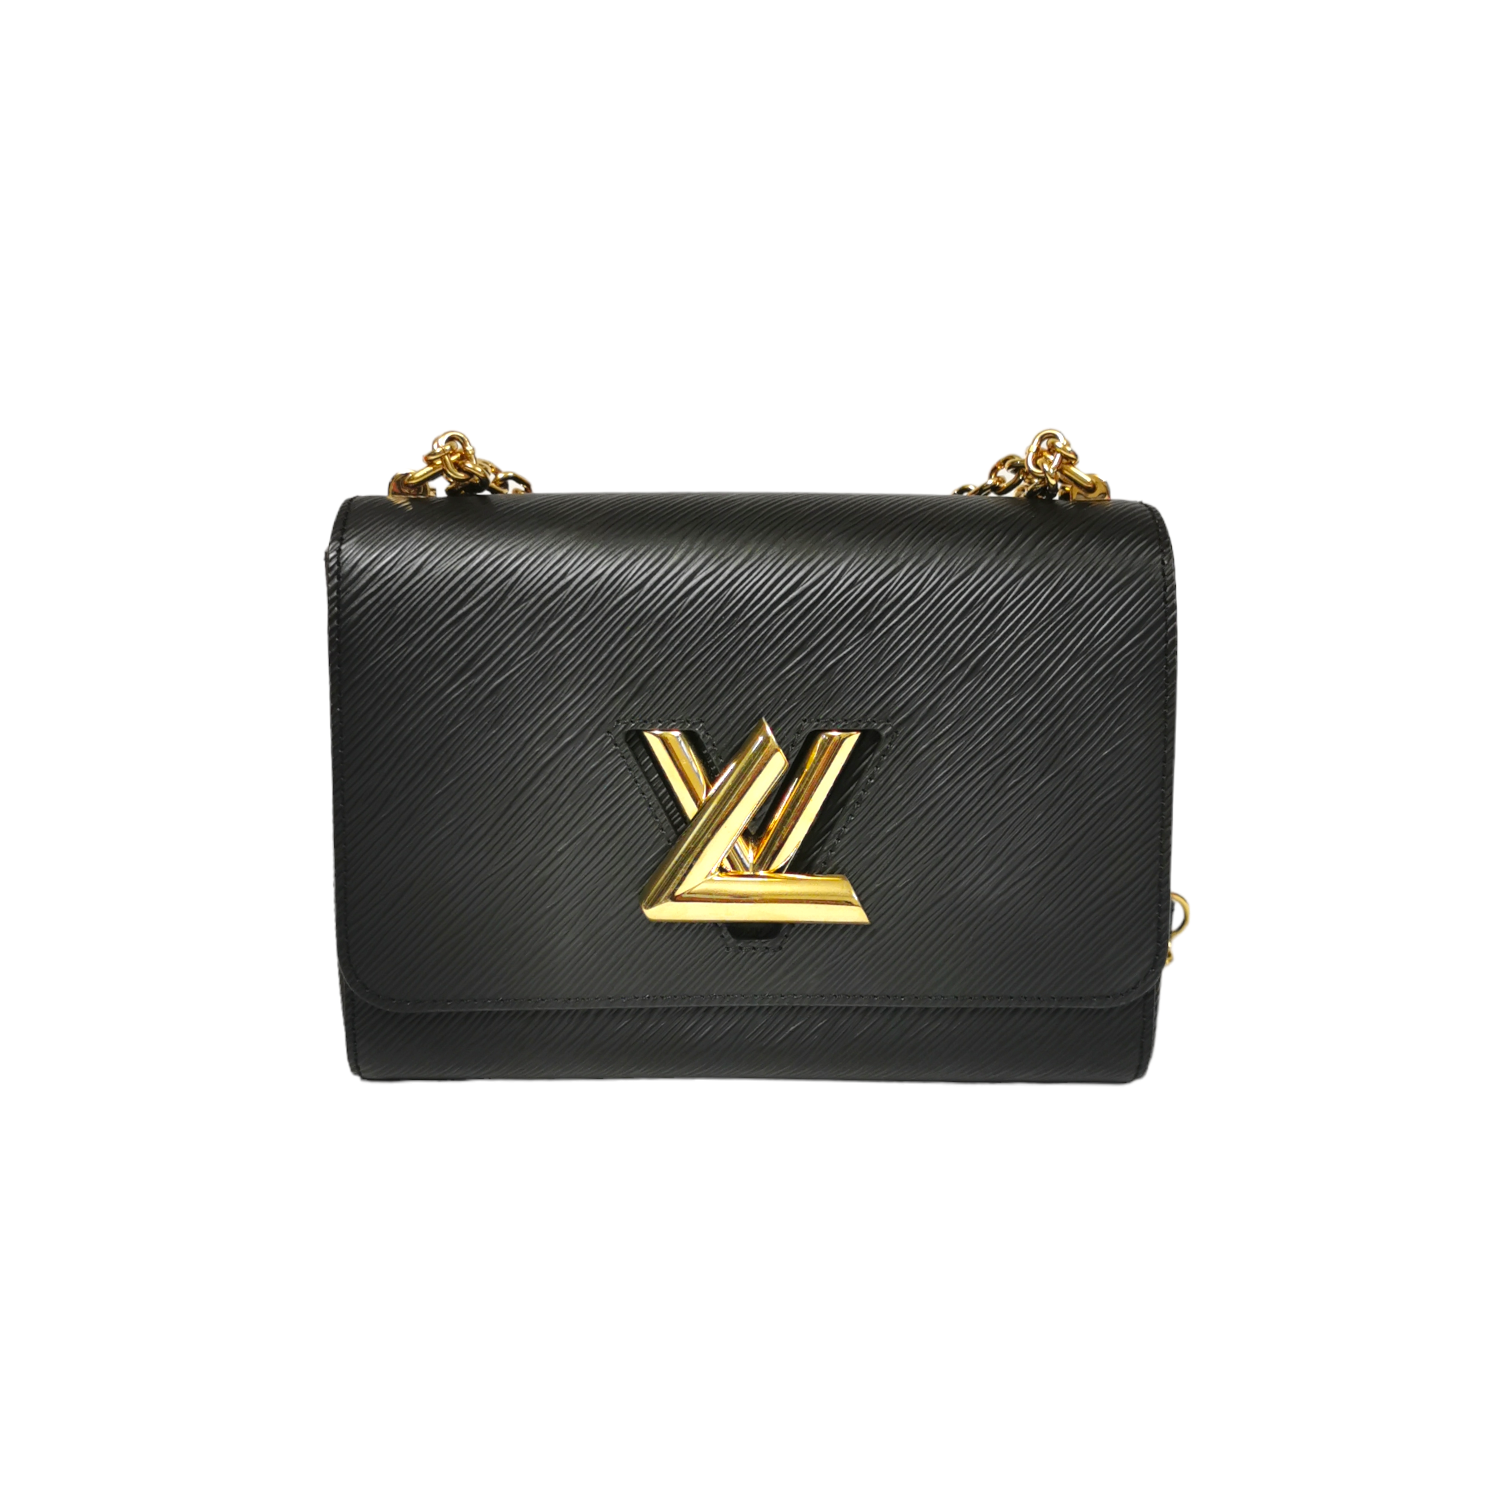 These New Louis Vuitton Twist Bags Are Versatile and EyeCatching   PurseBlog